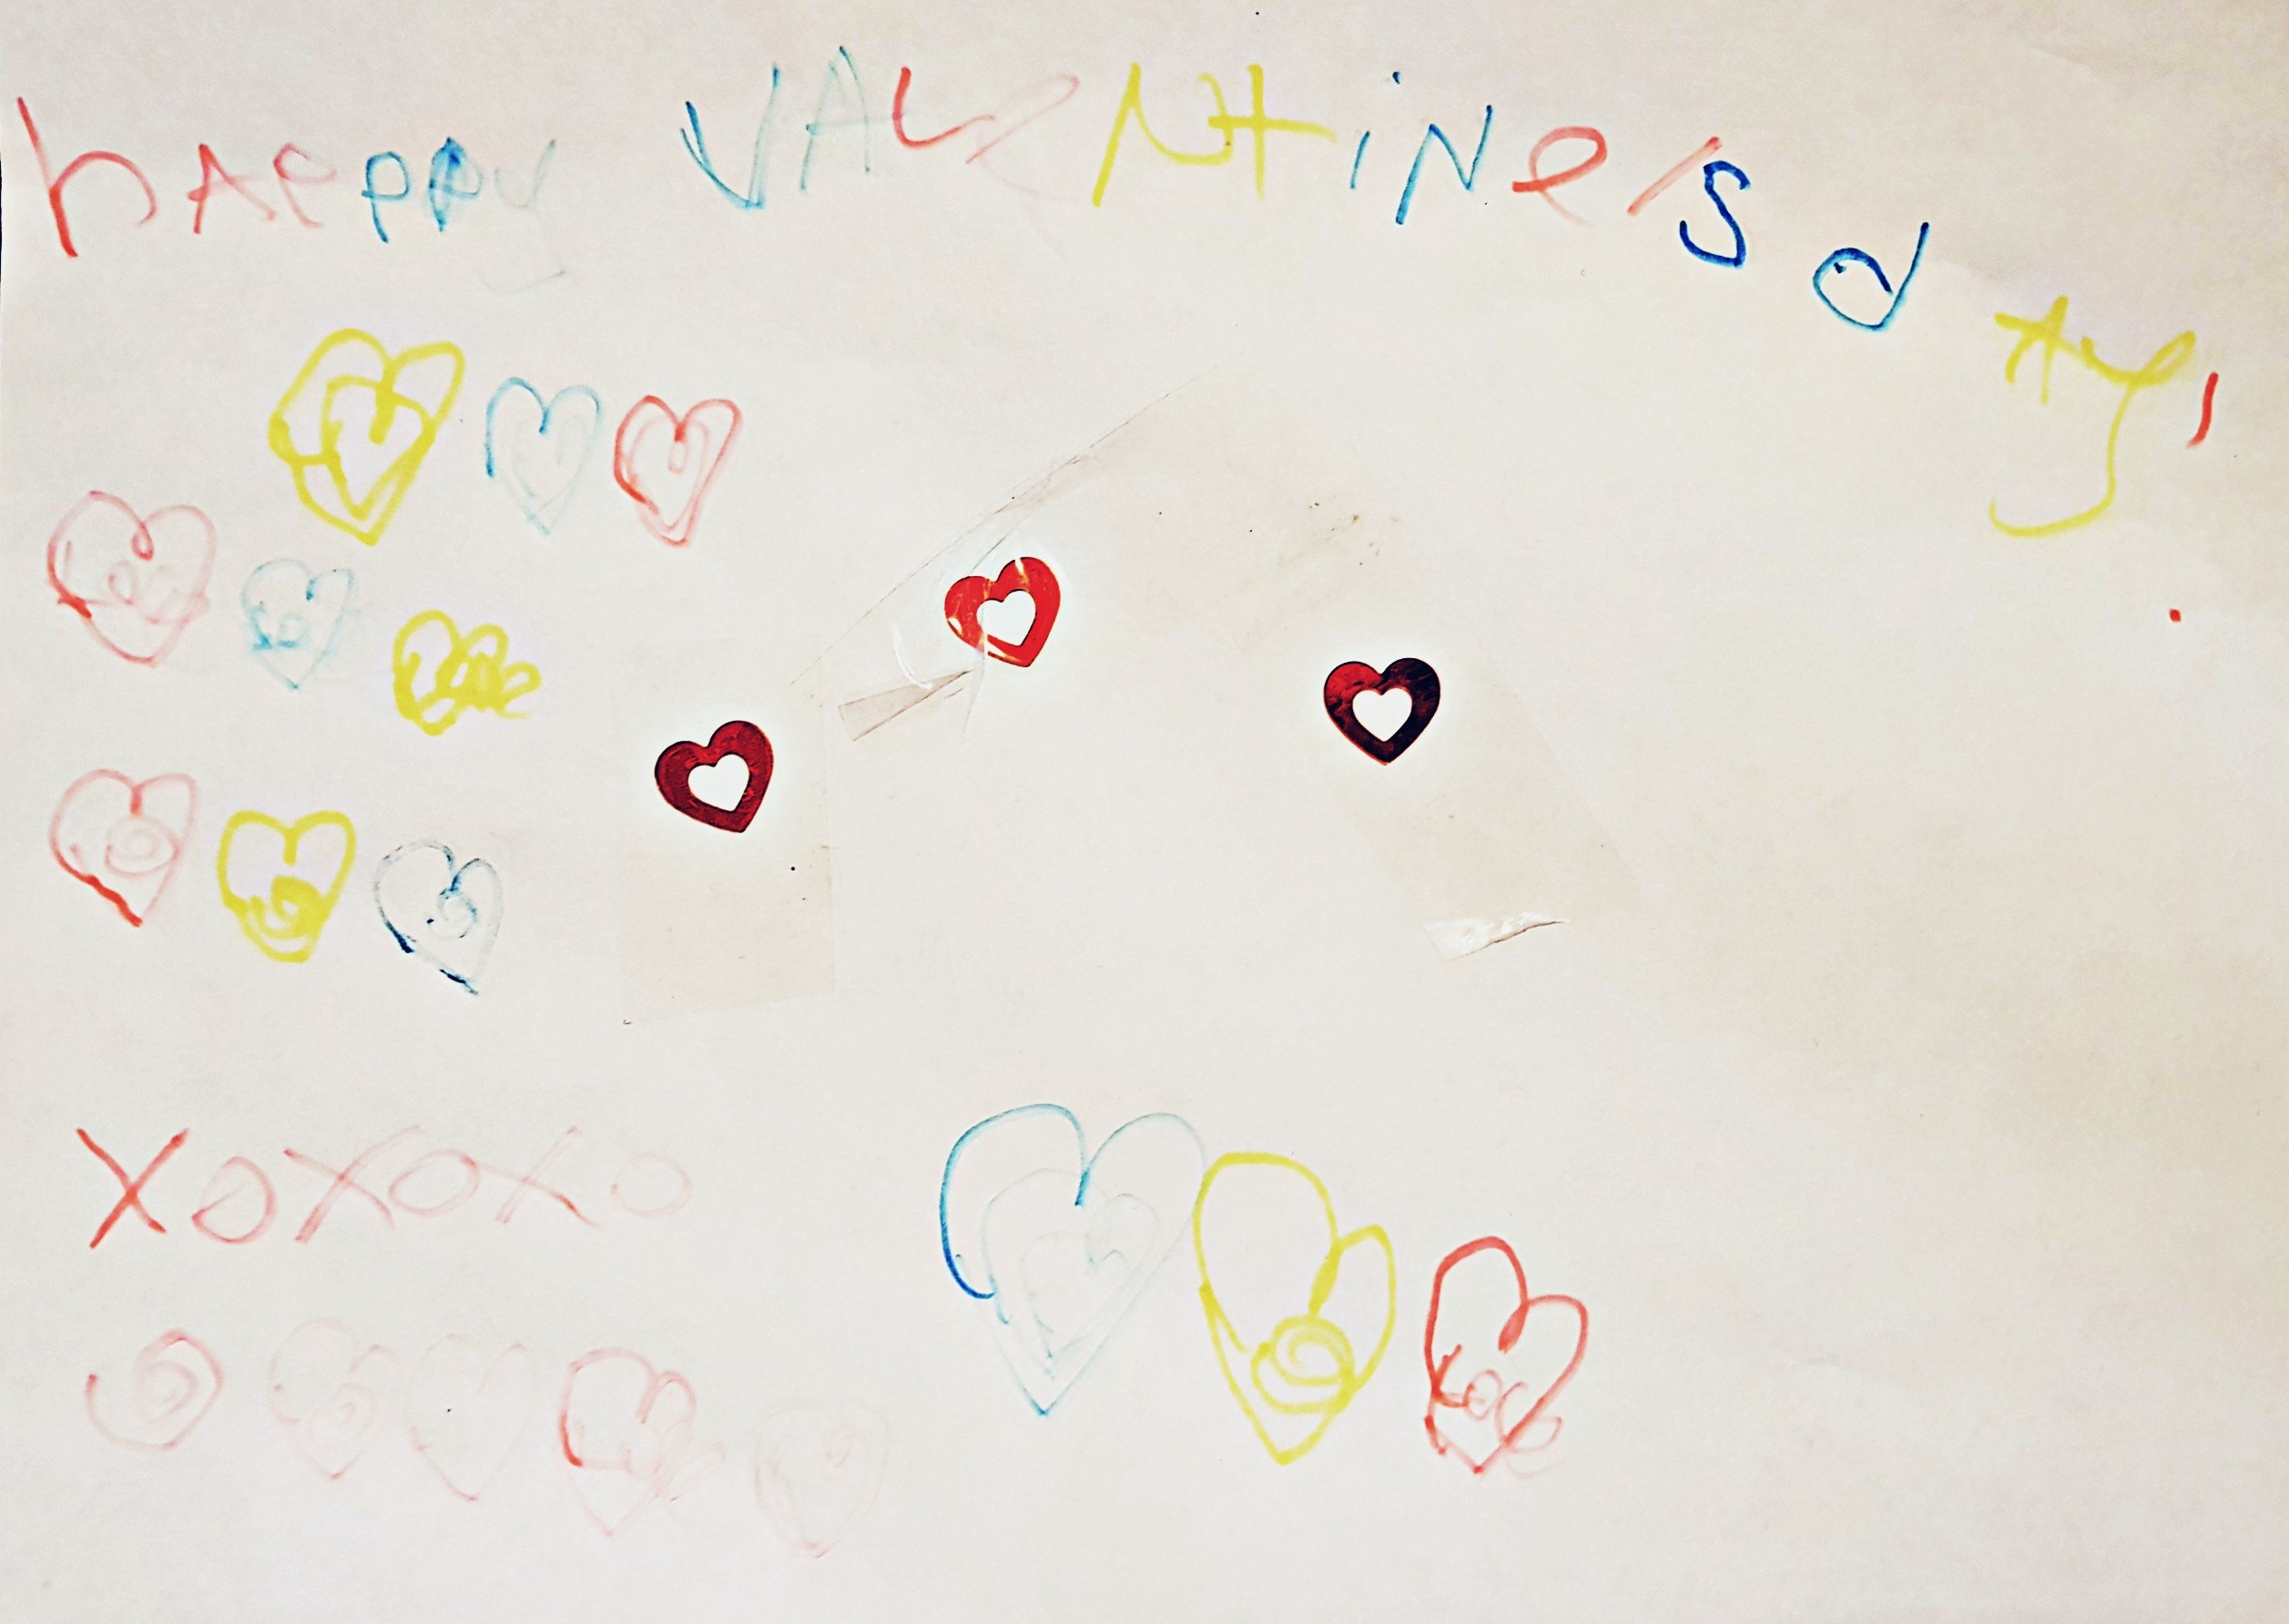 Happy valentines day message with lots of colourful hearts drawn and written by Squiggle.